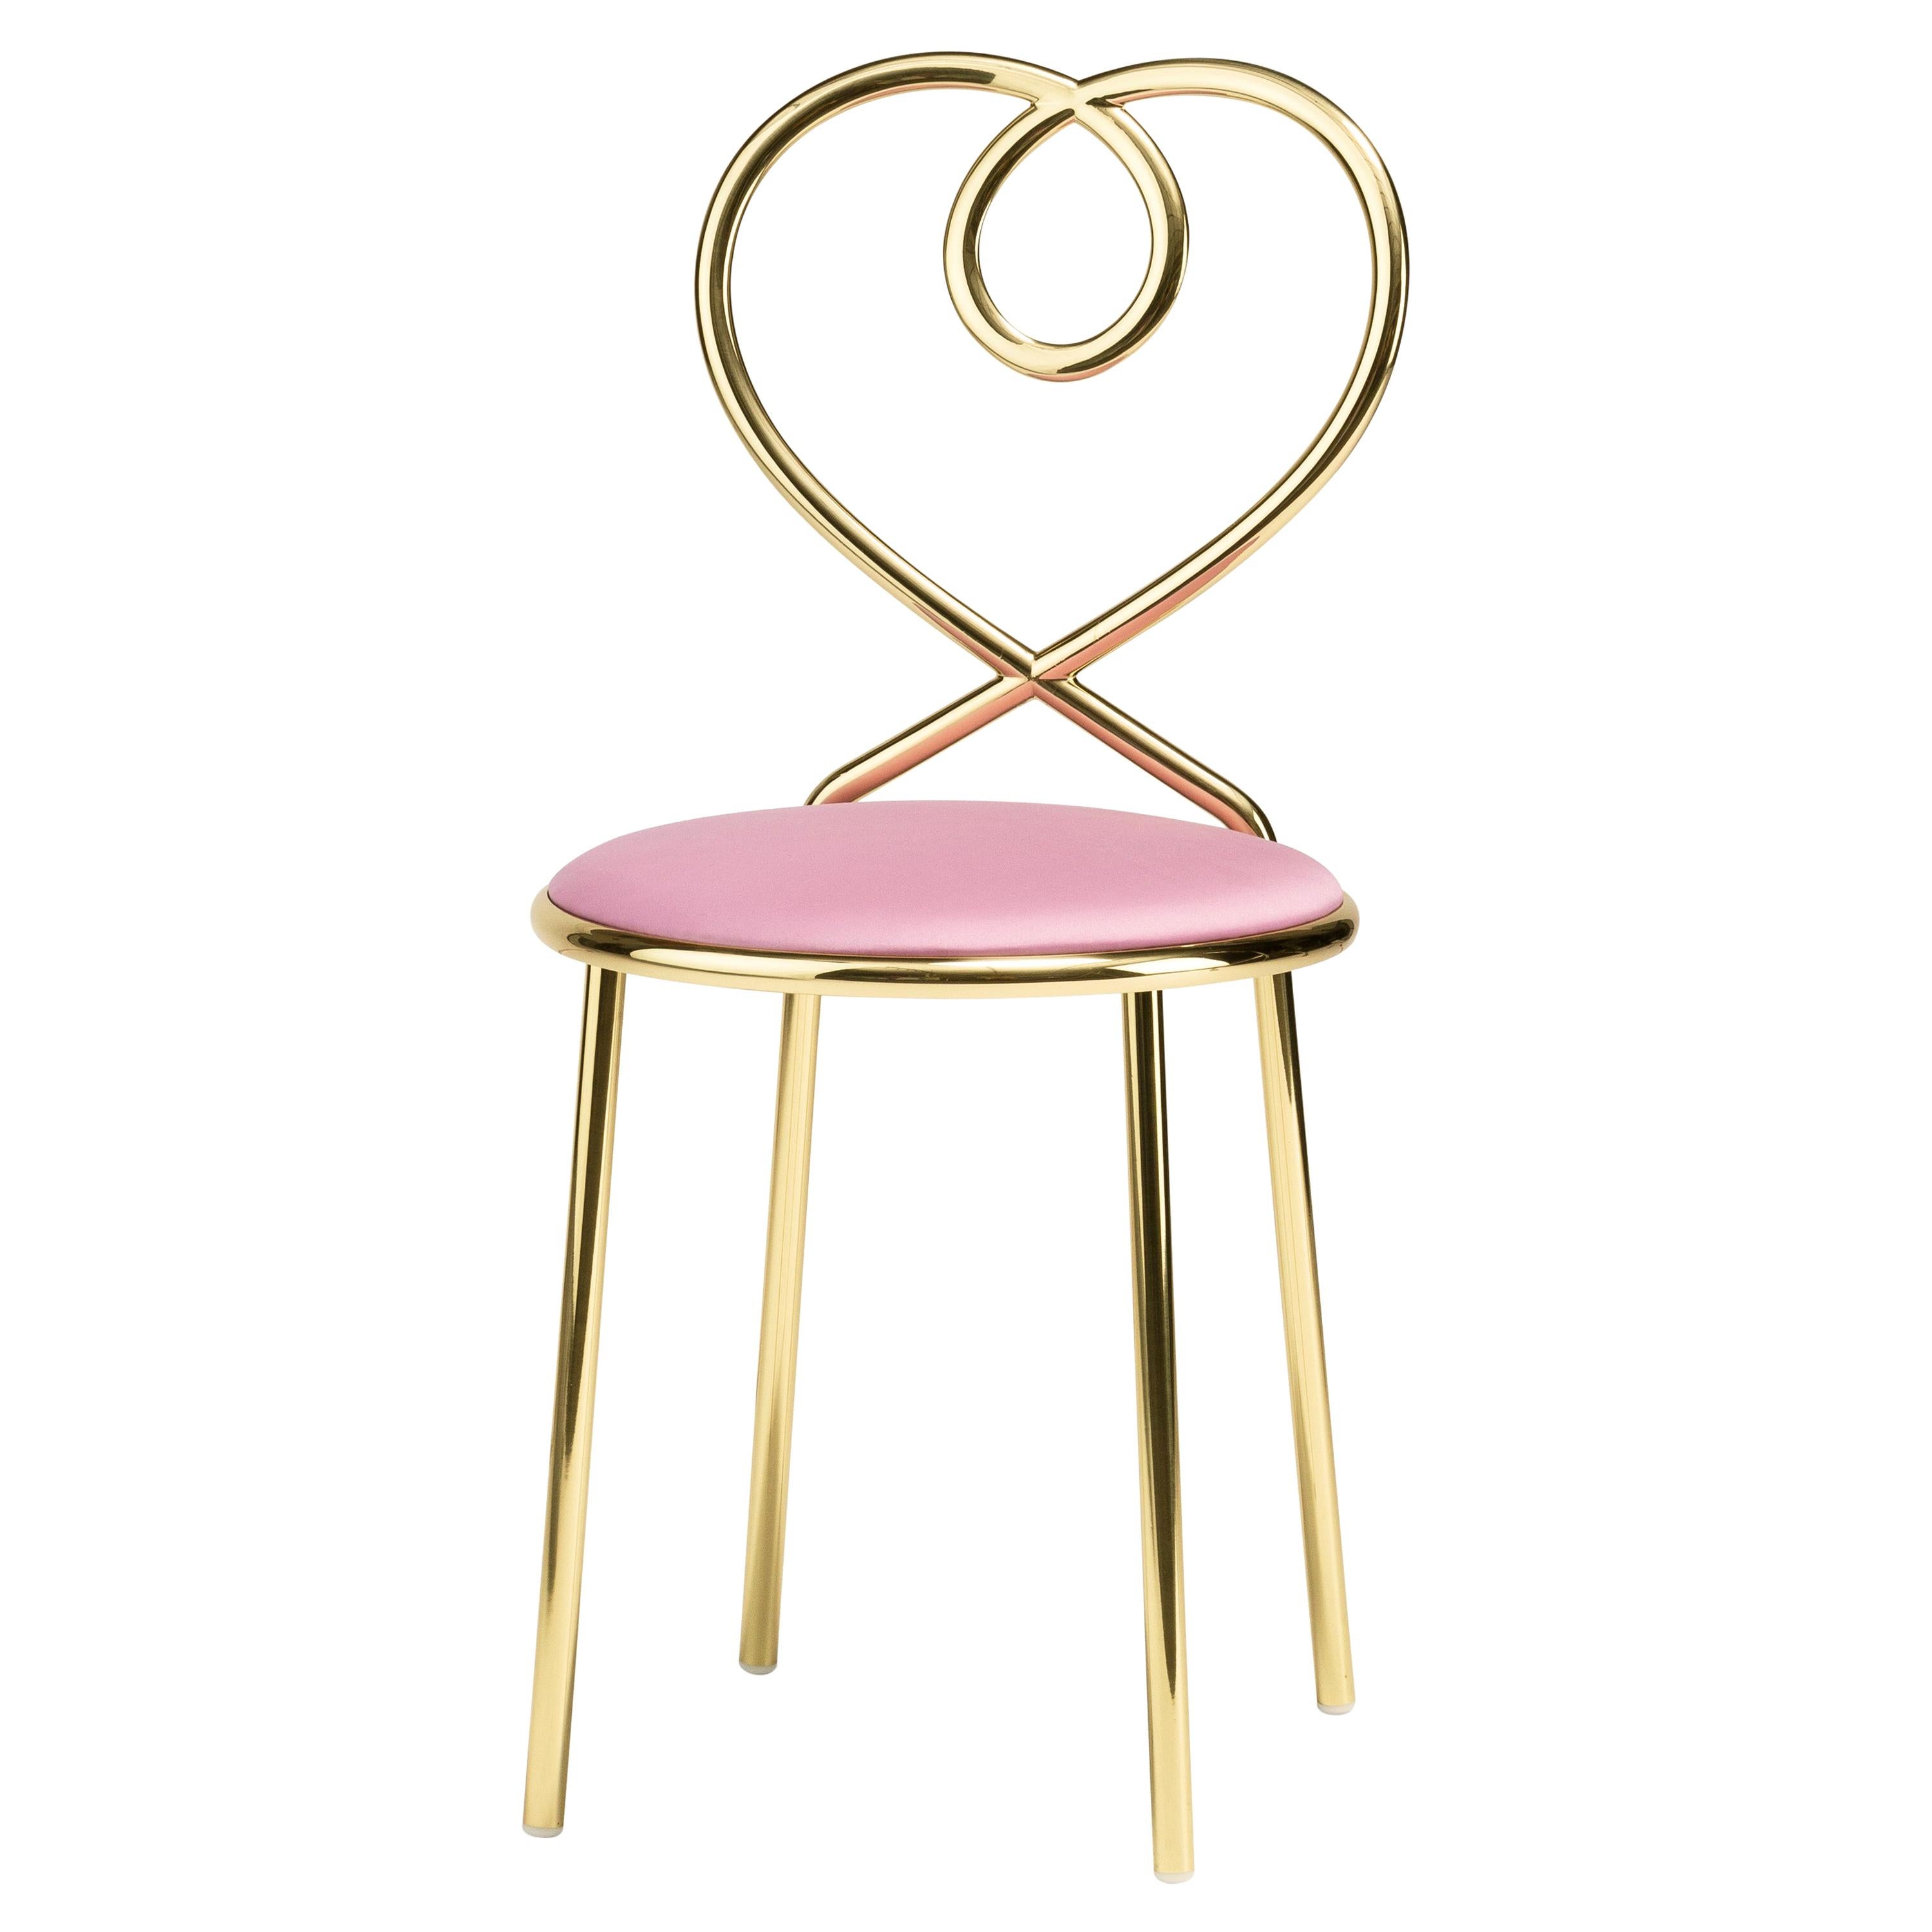 Love Chair in Ninfea with Polished Brass by Nika Zupanc